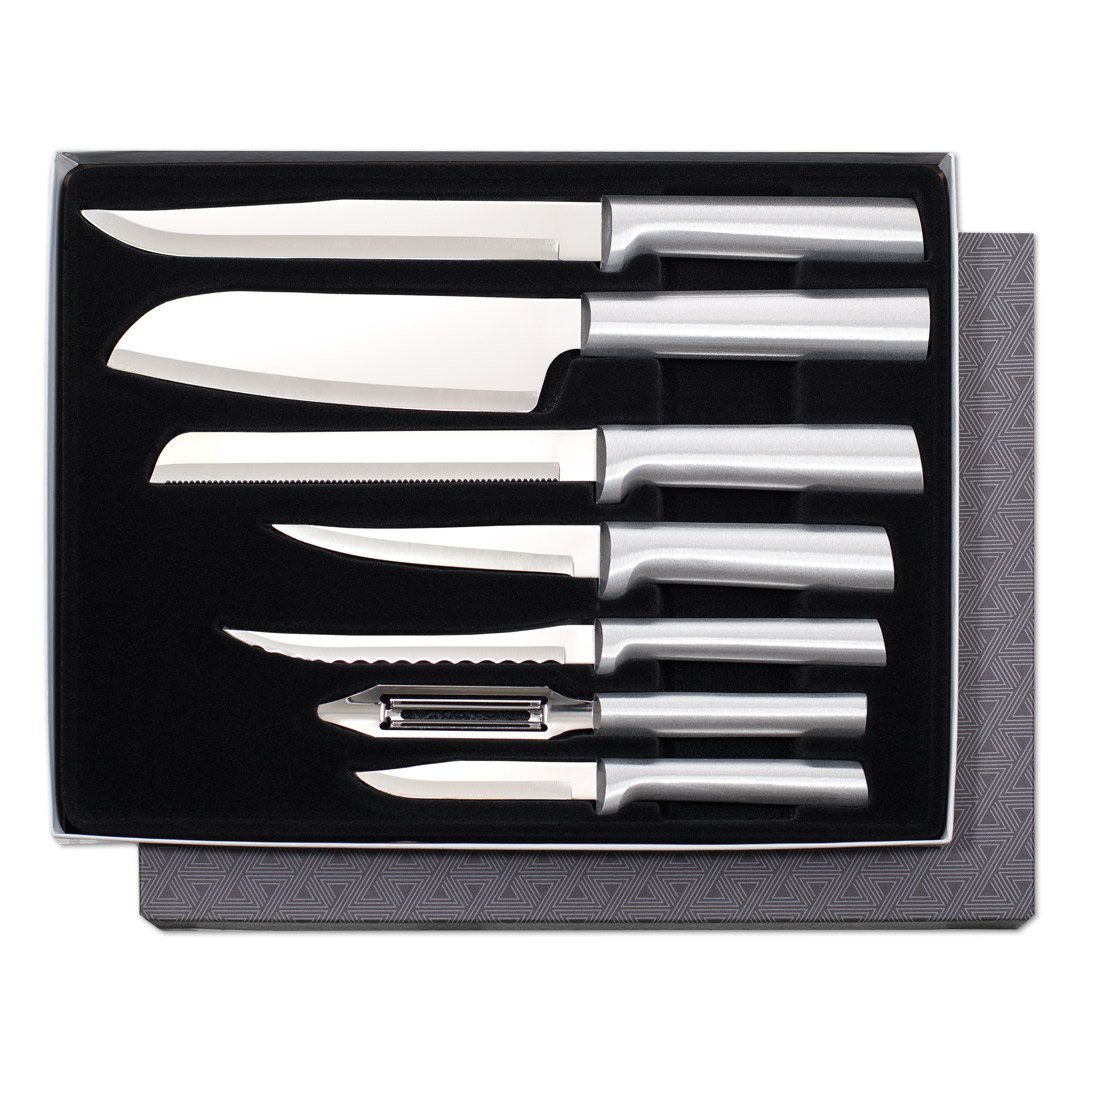 Product Review: Rada Kitchen Knives and Cutlery